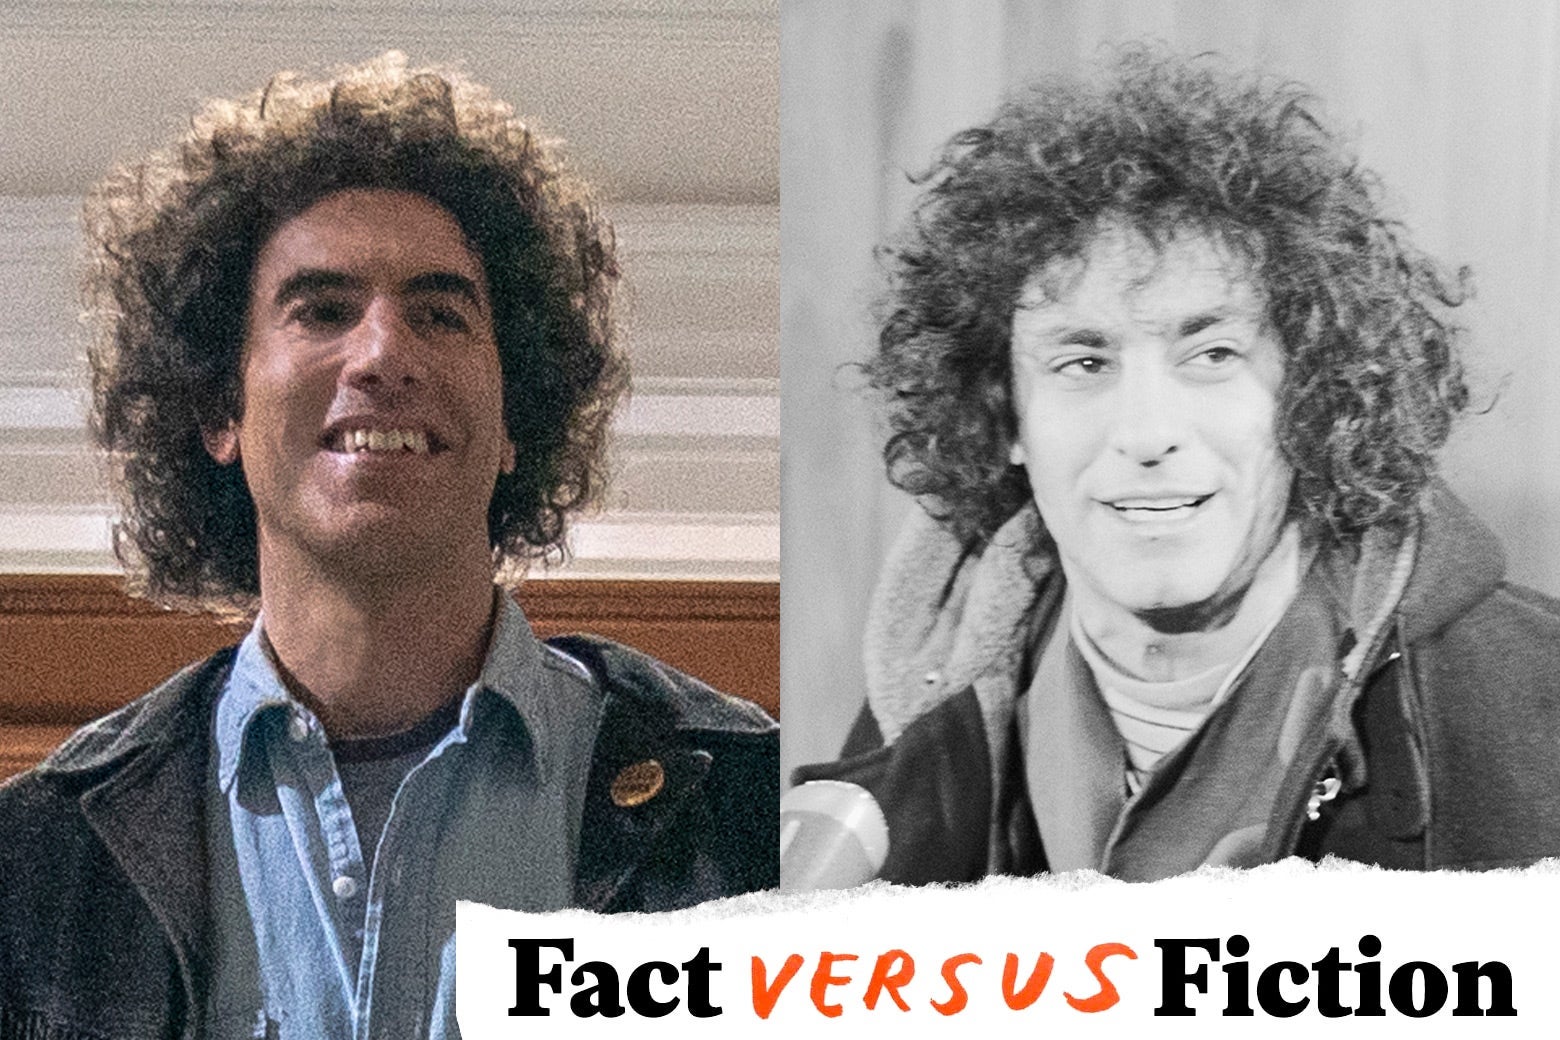 Sacha Baron Cohen as Abbie Hoffman, and Abbie Hoffman, with a "Fact Versus Fiction" tearaway tag